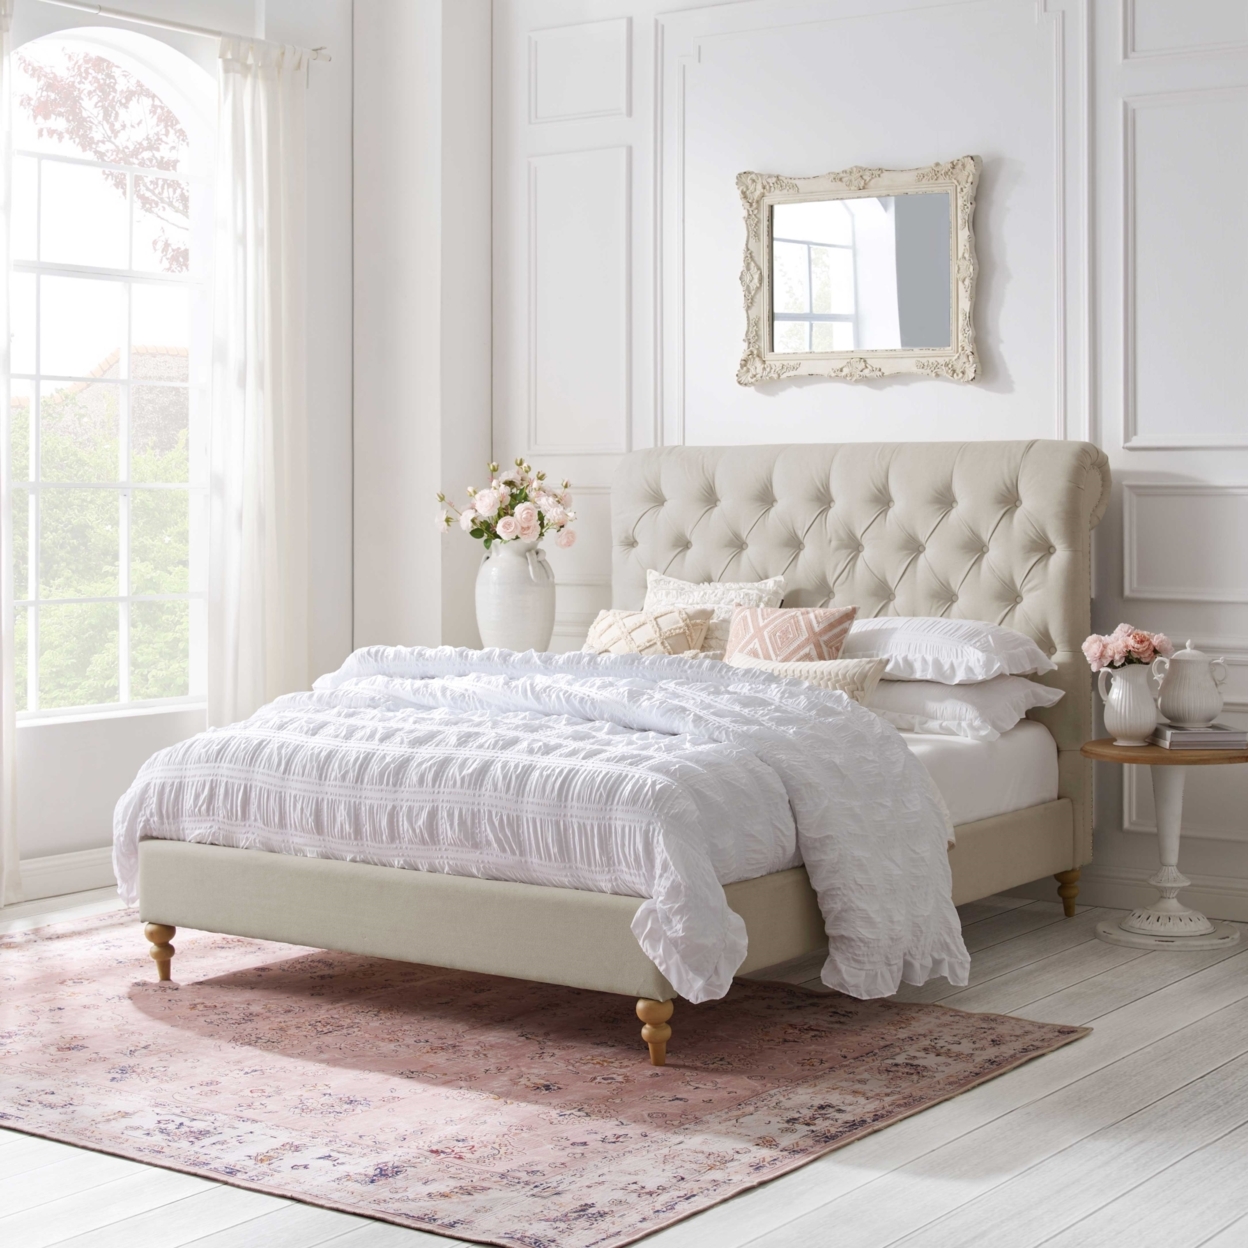 Kailynn Bed-Rolled Top Button Tufted-Nailhead Trim-Slats Included - Beige, Queen